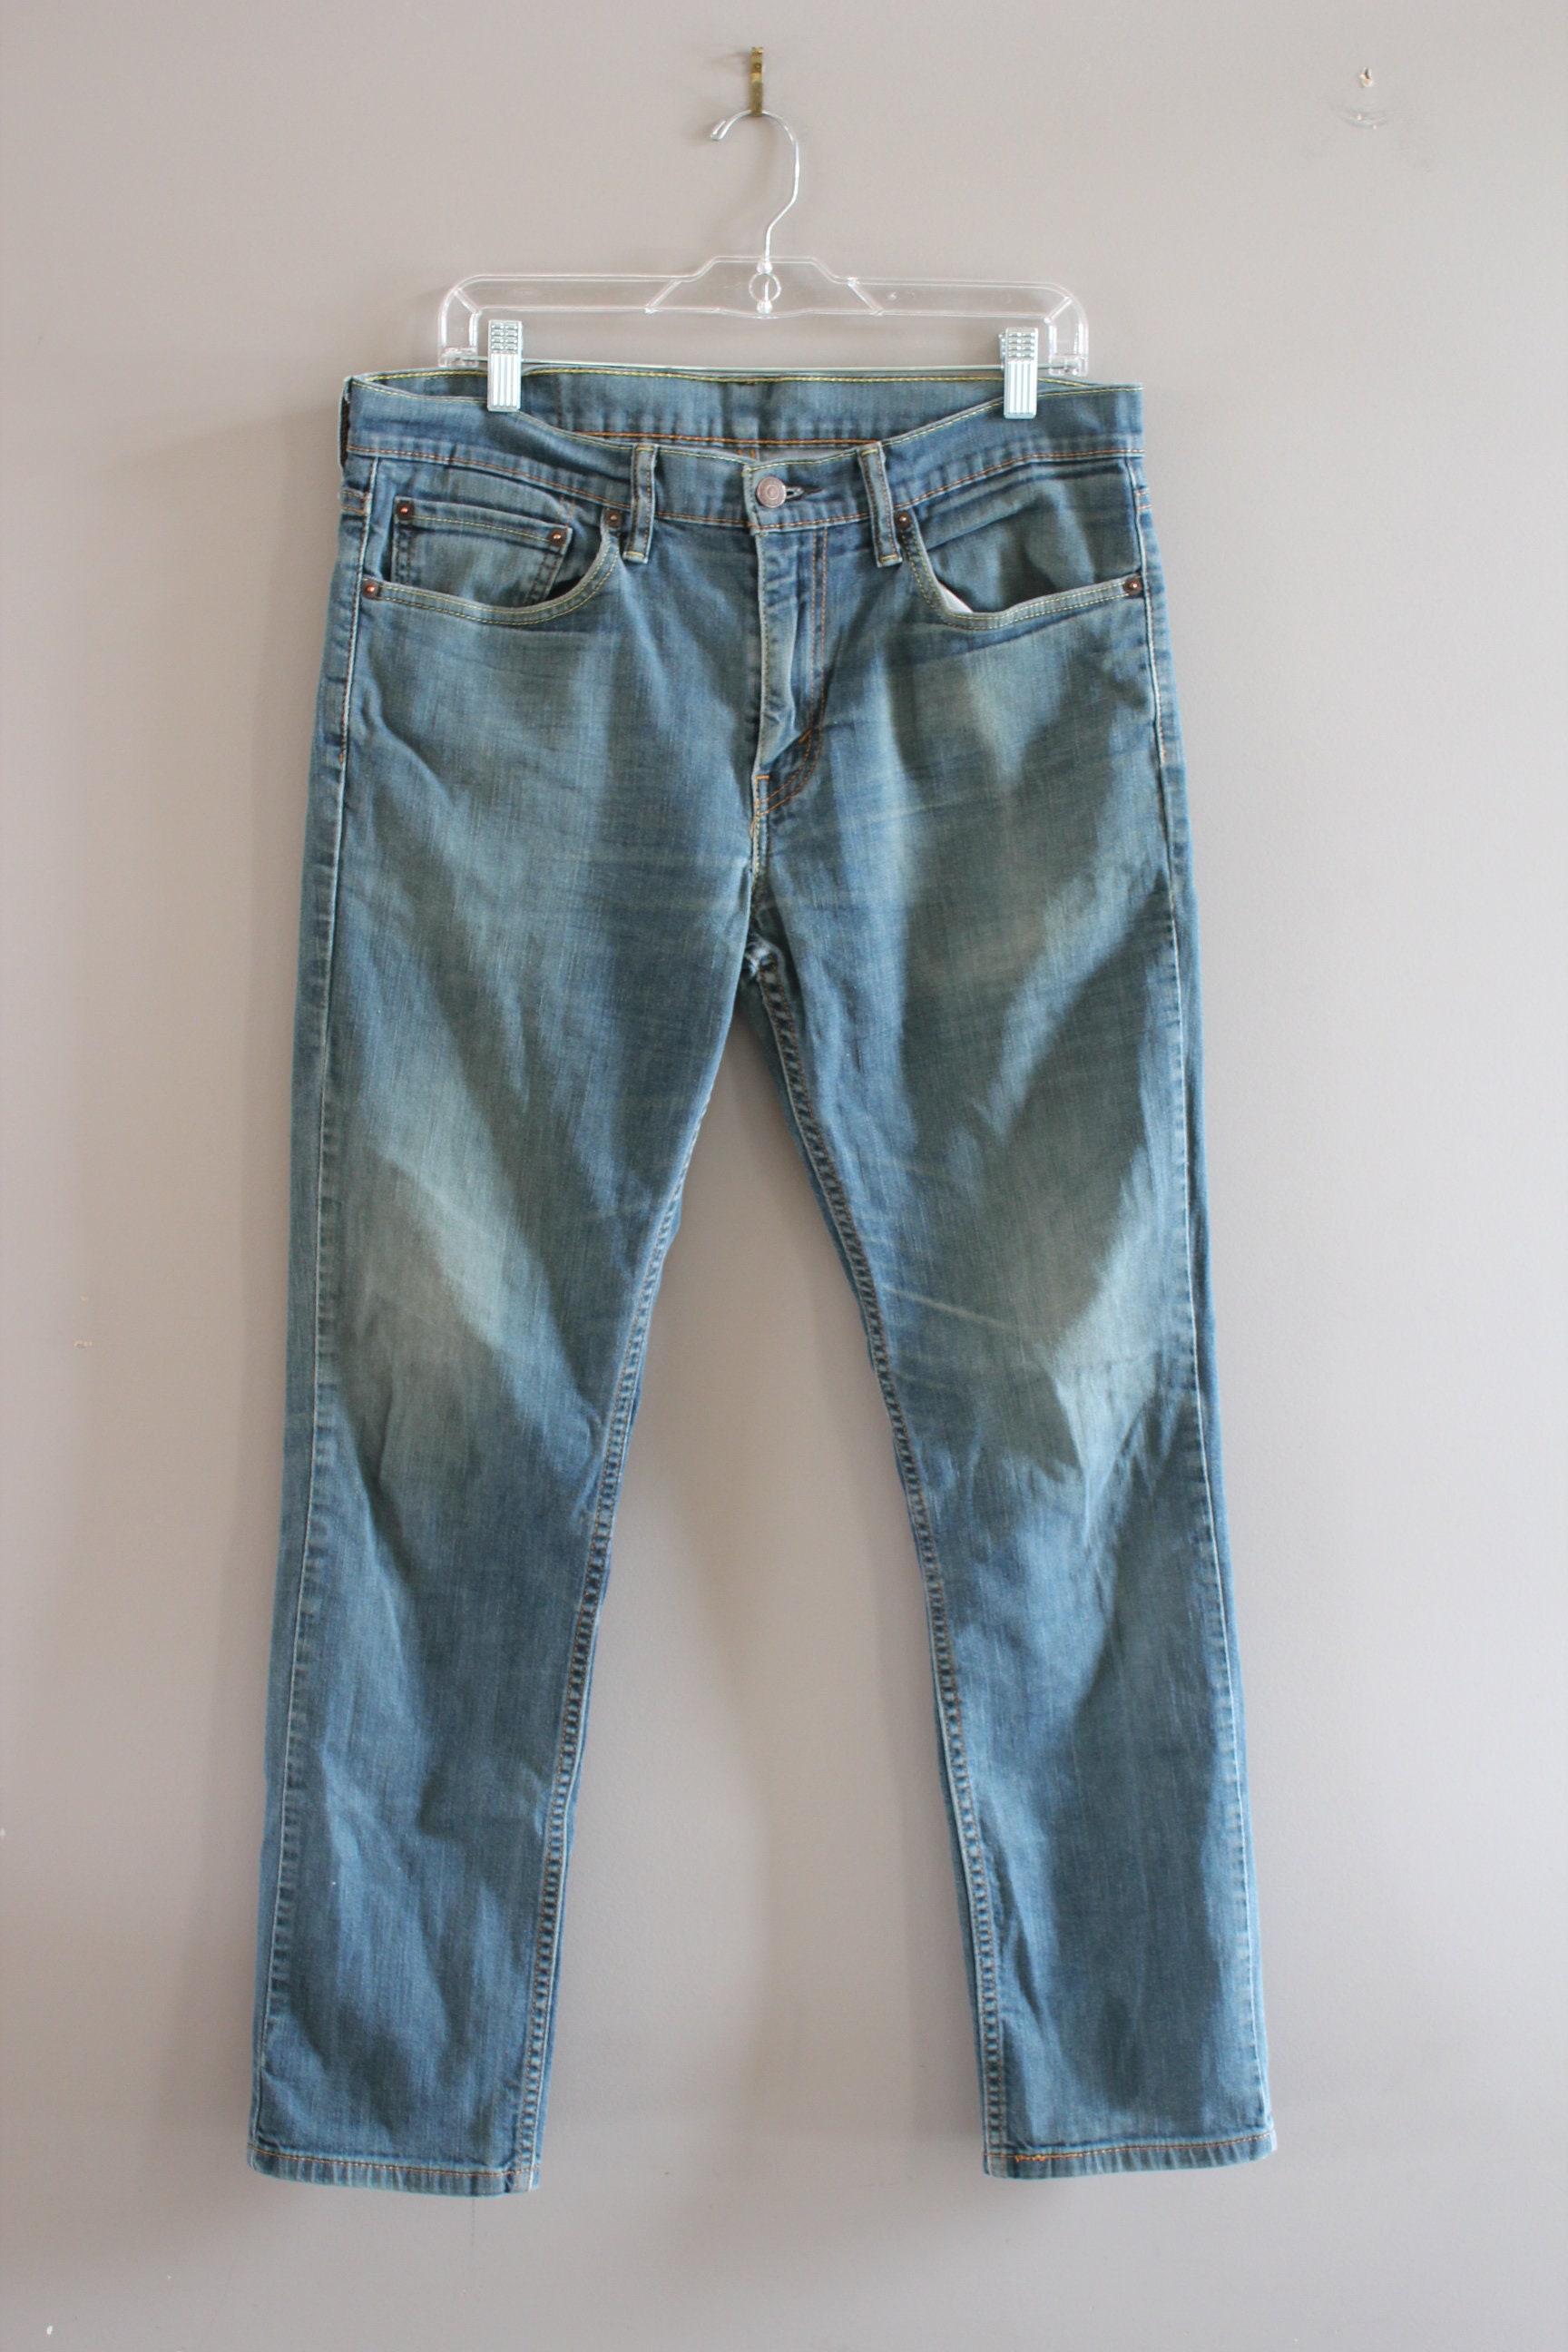 Levis 511 Jeans Slim Fit Tapered Cut Stonewashed Blue Zip Fly - Etsy  Australia